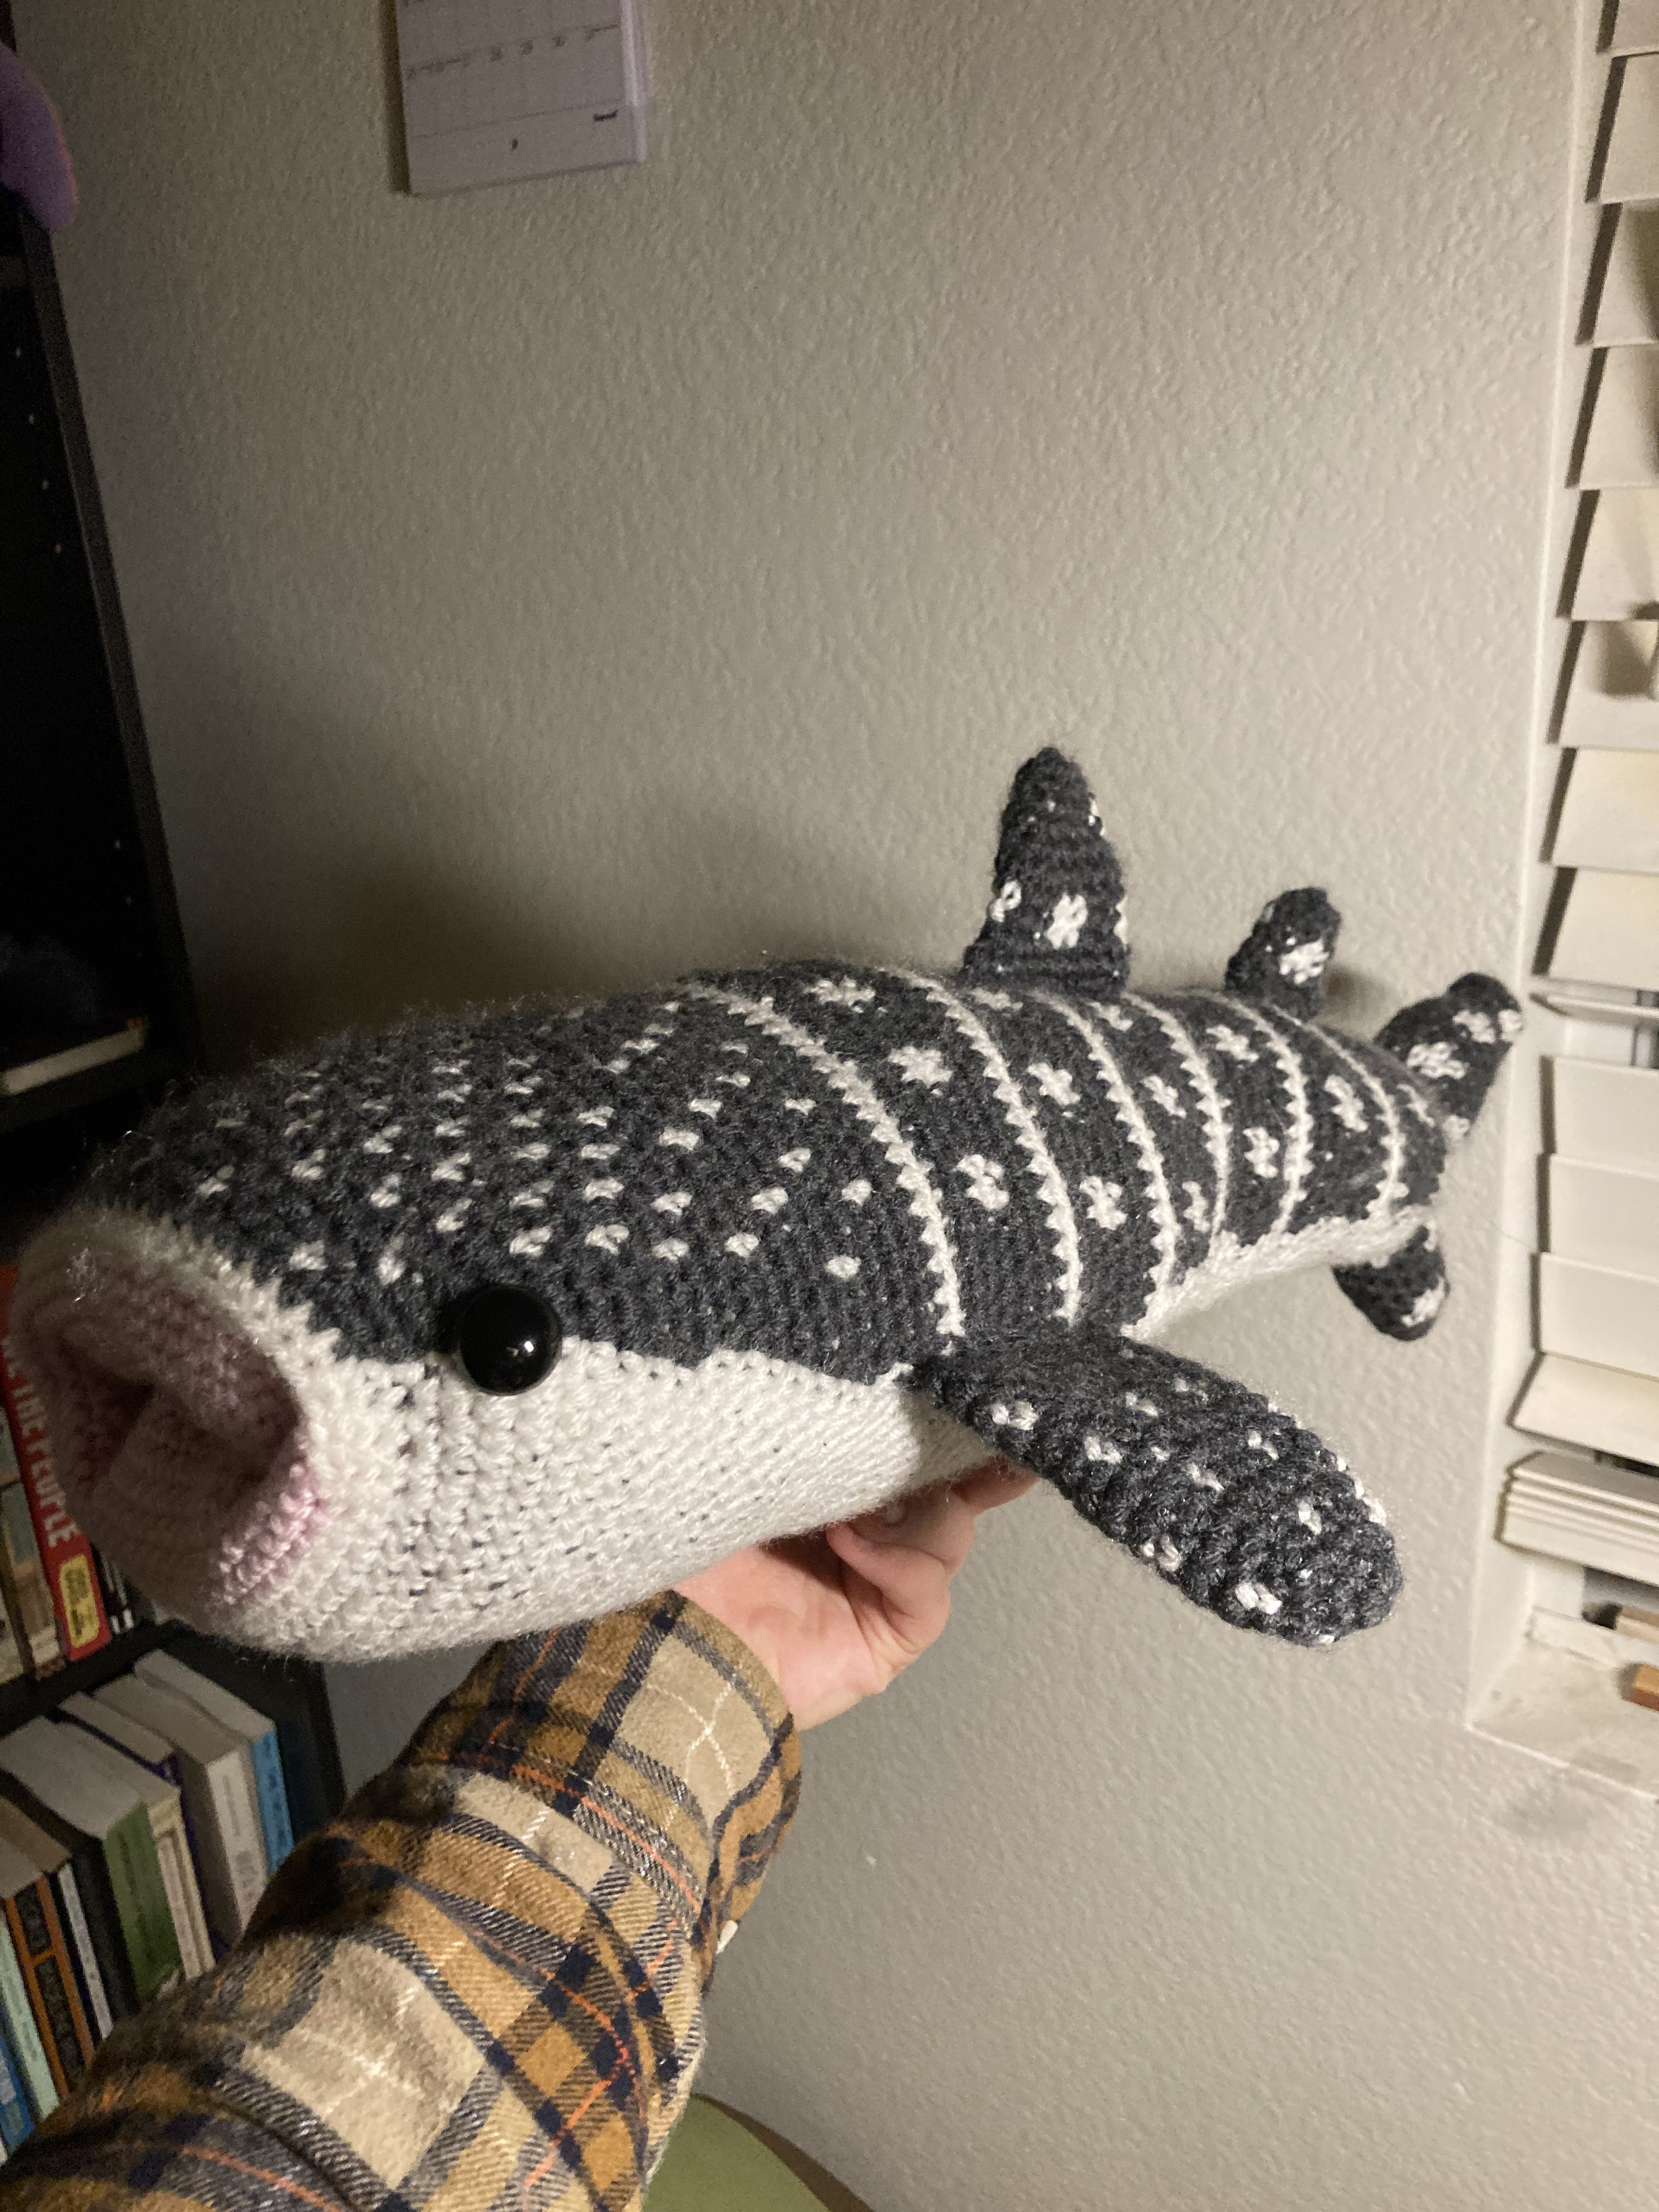 A picture of a very large crocheted whale shark.